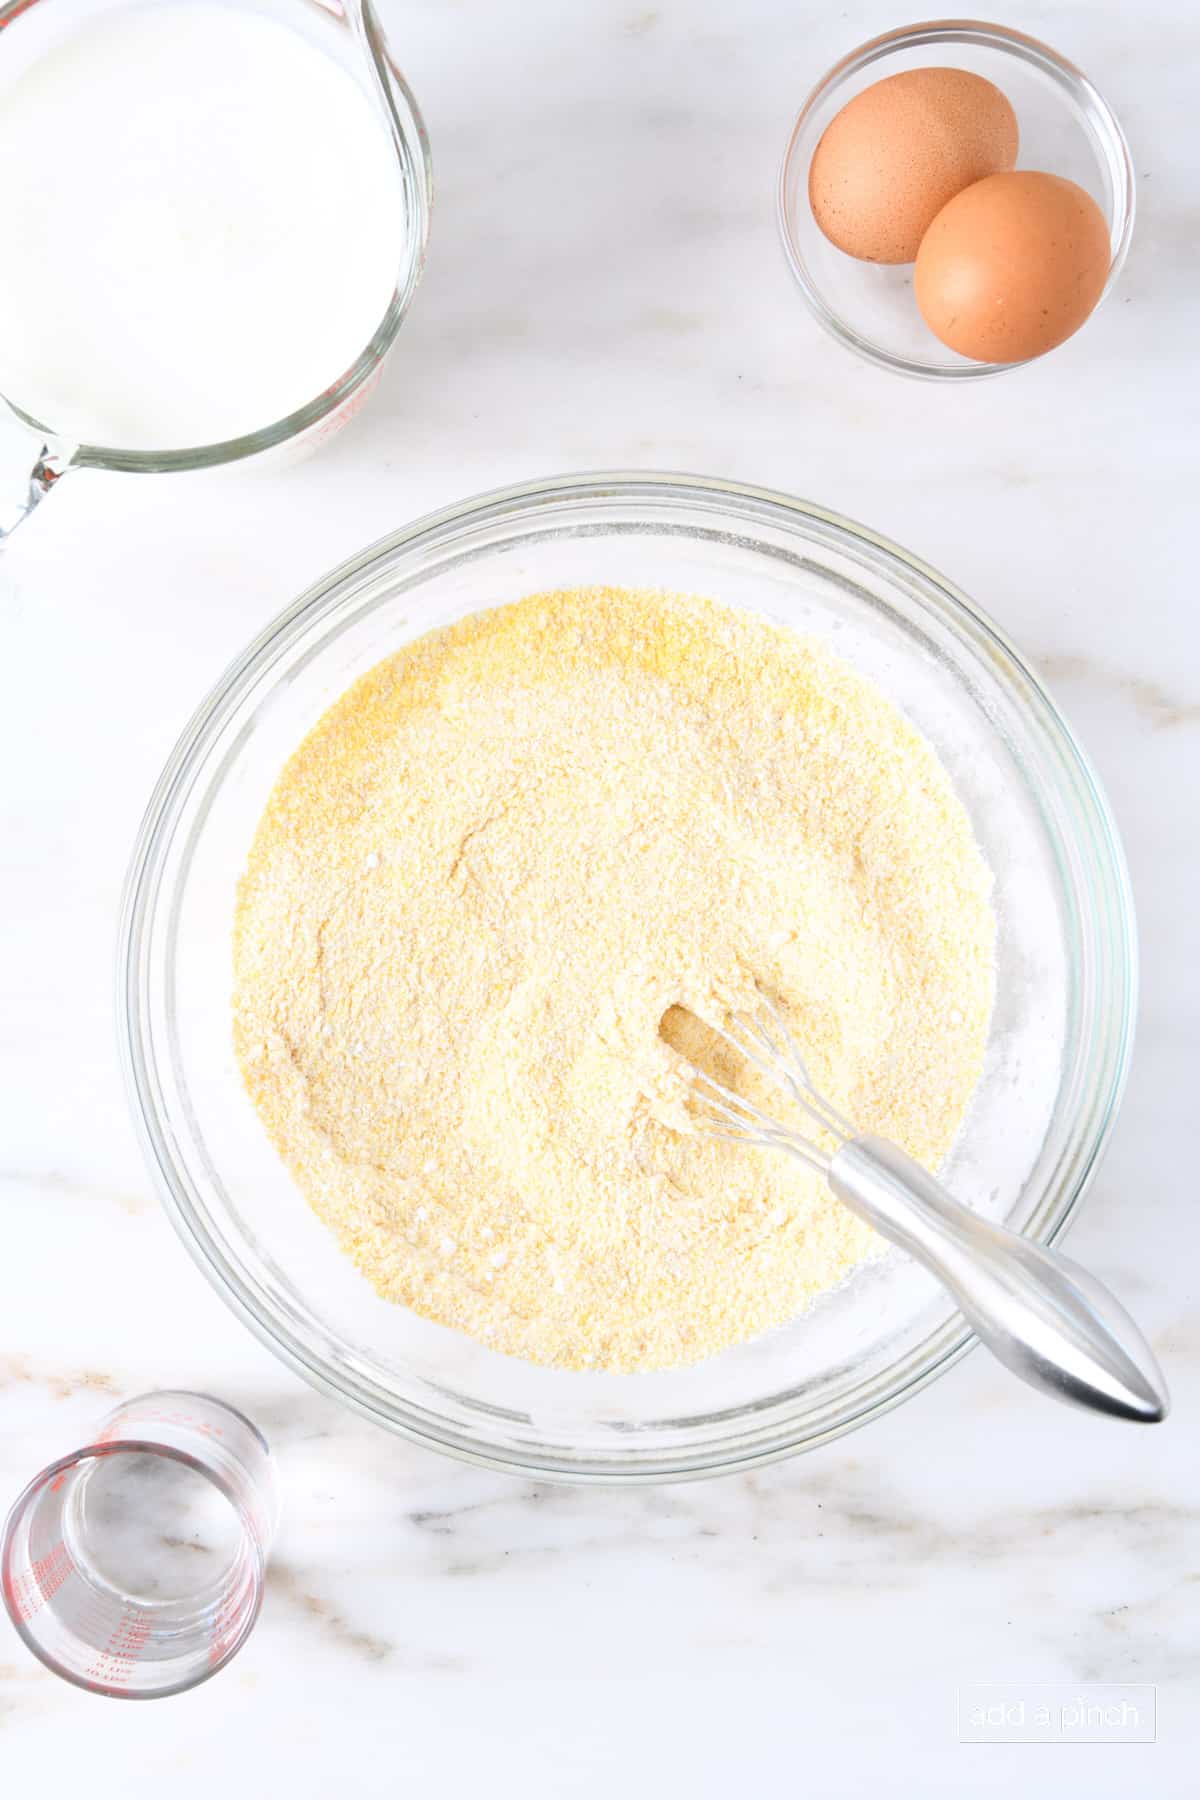 Whisked flour and cornmeal in a glass bowl with a whisk.